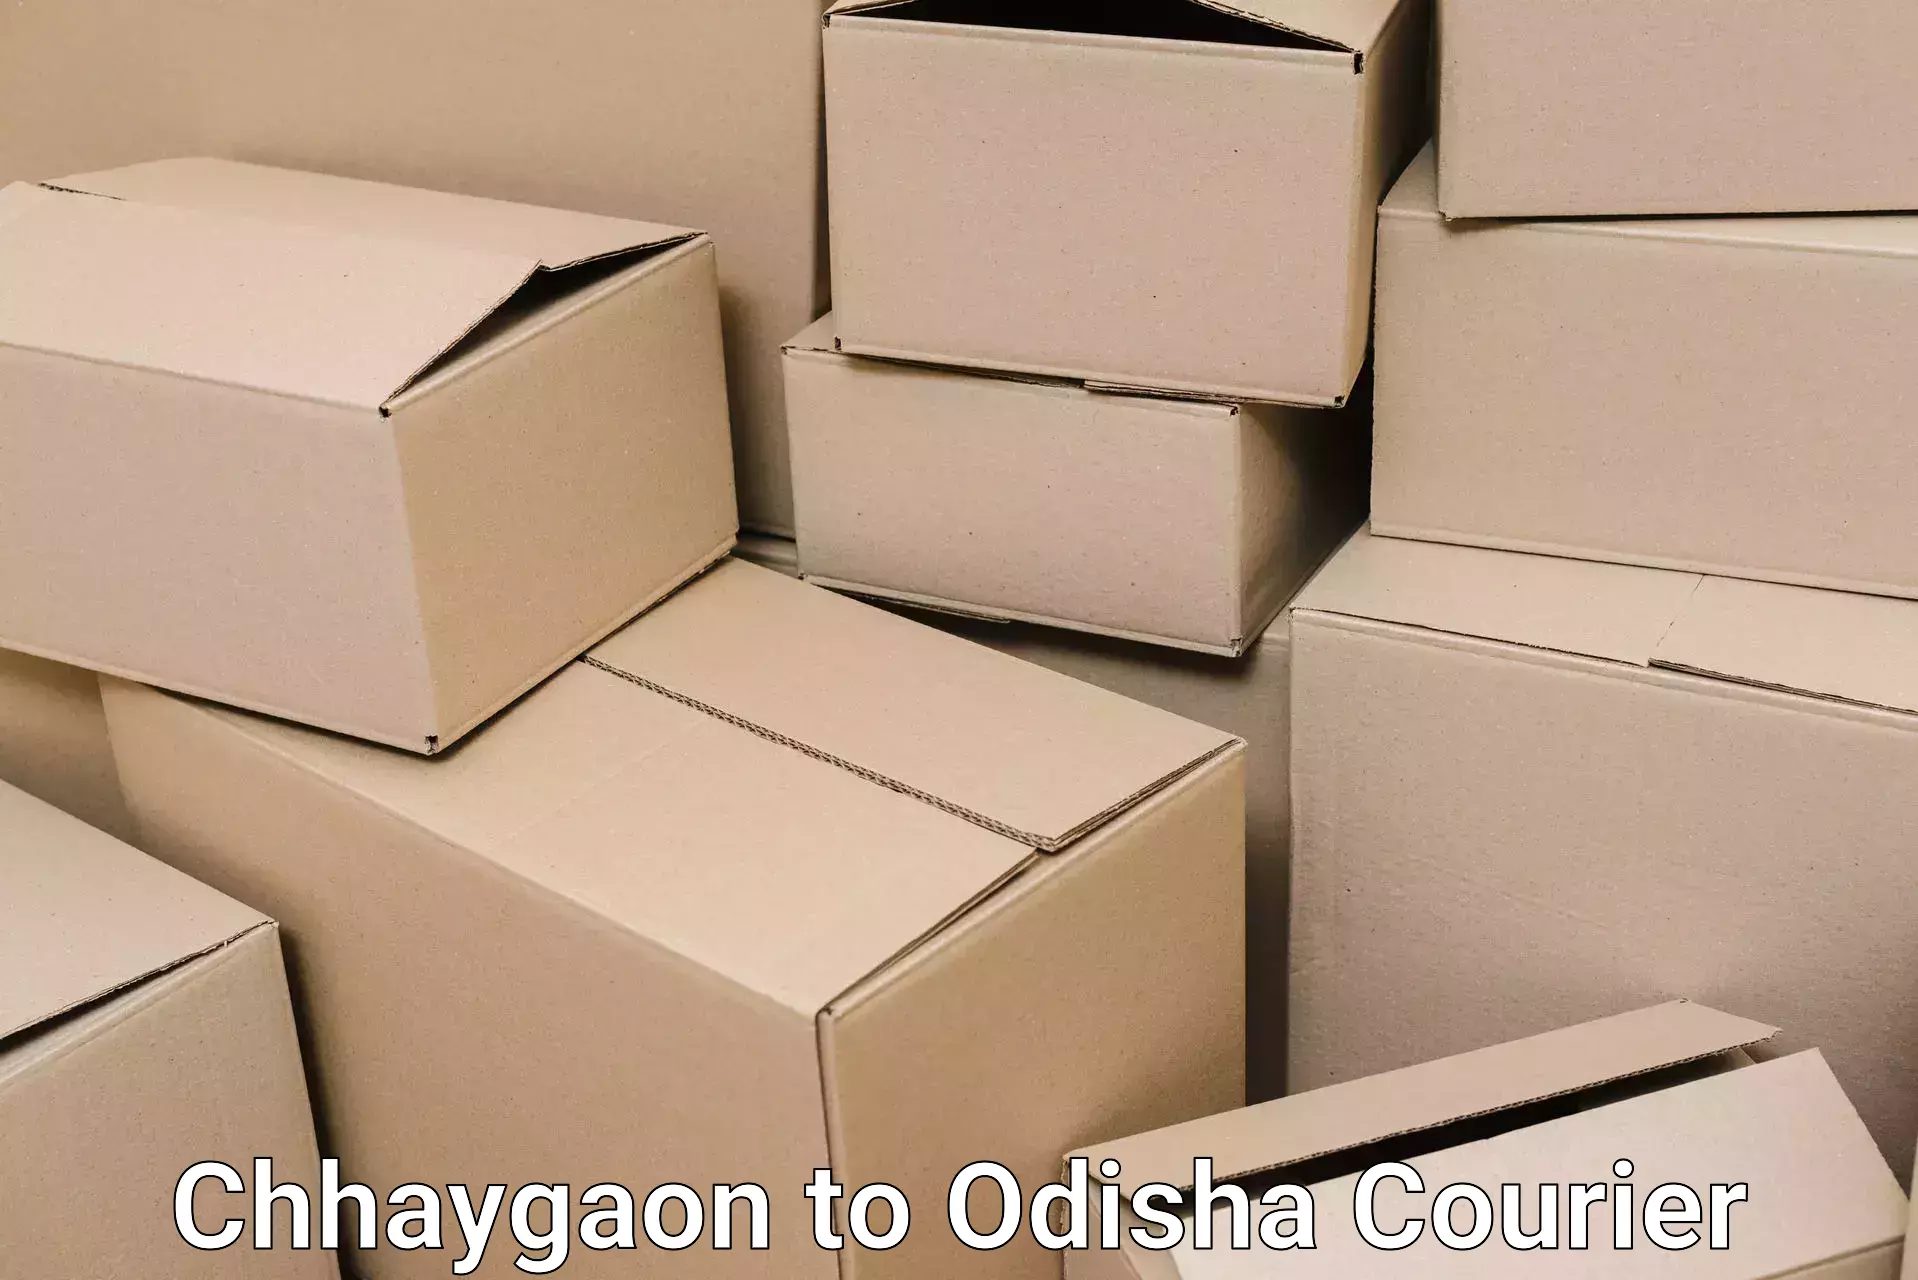 Moving and packing experts Chhaygaon to Dhamara